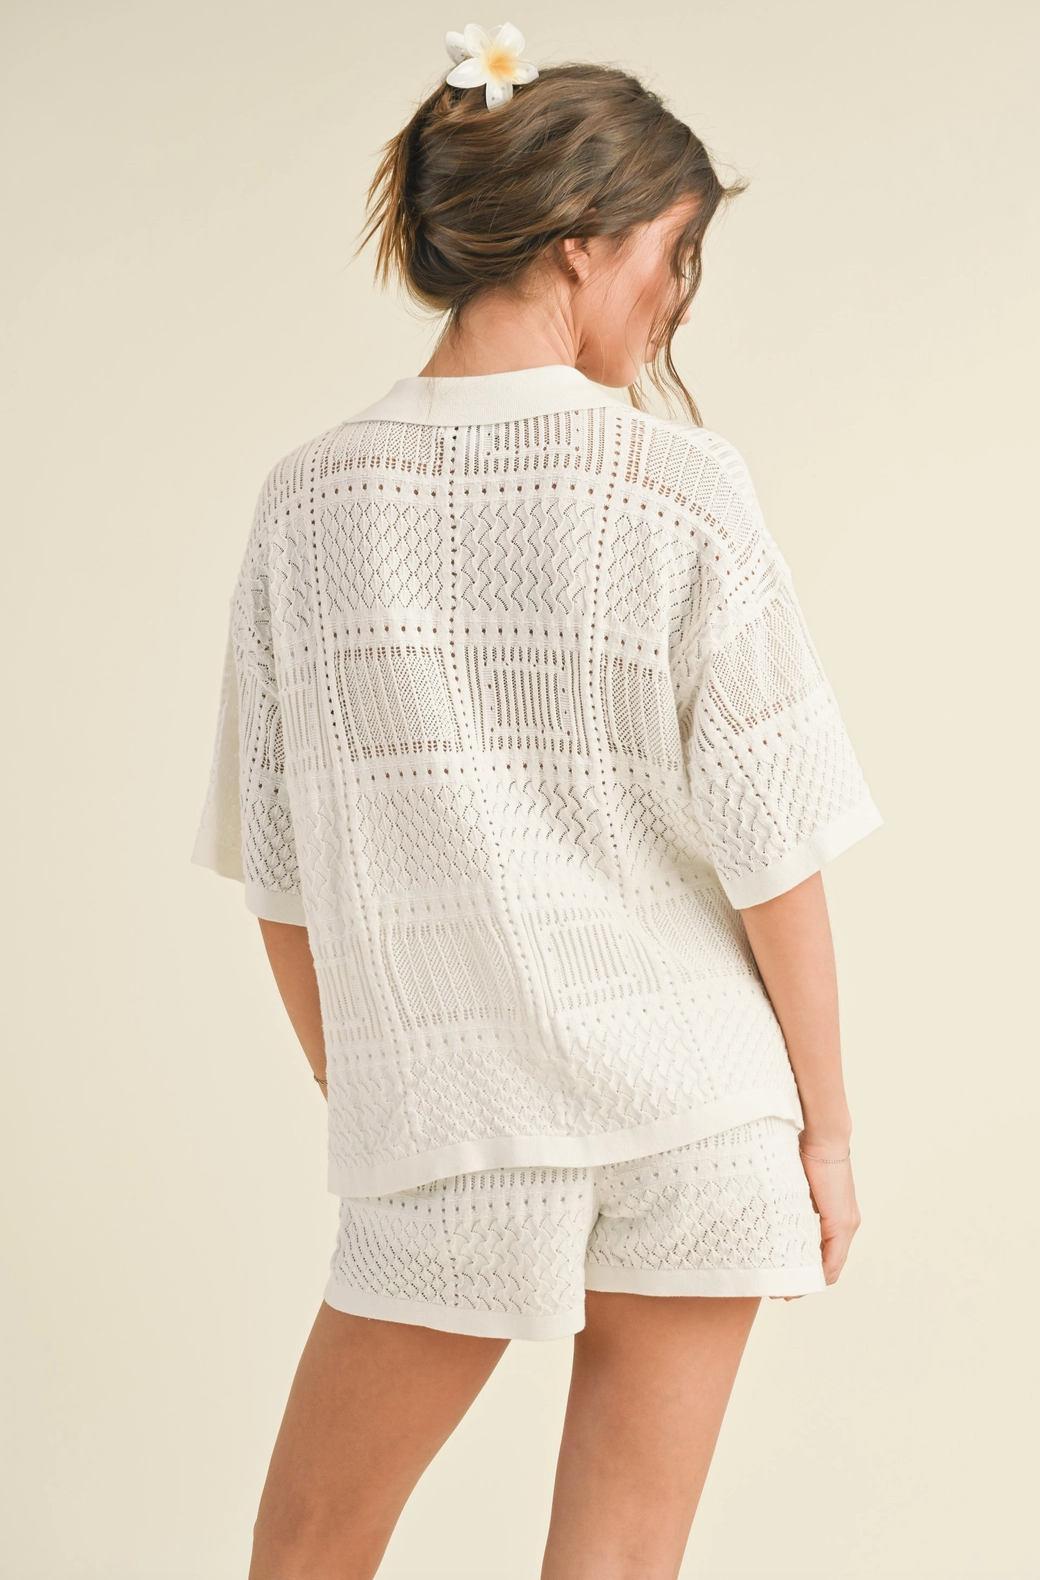 Mix Pattern Knitted Top In White